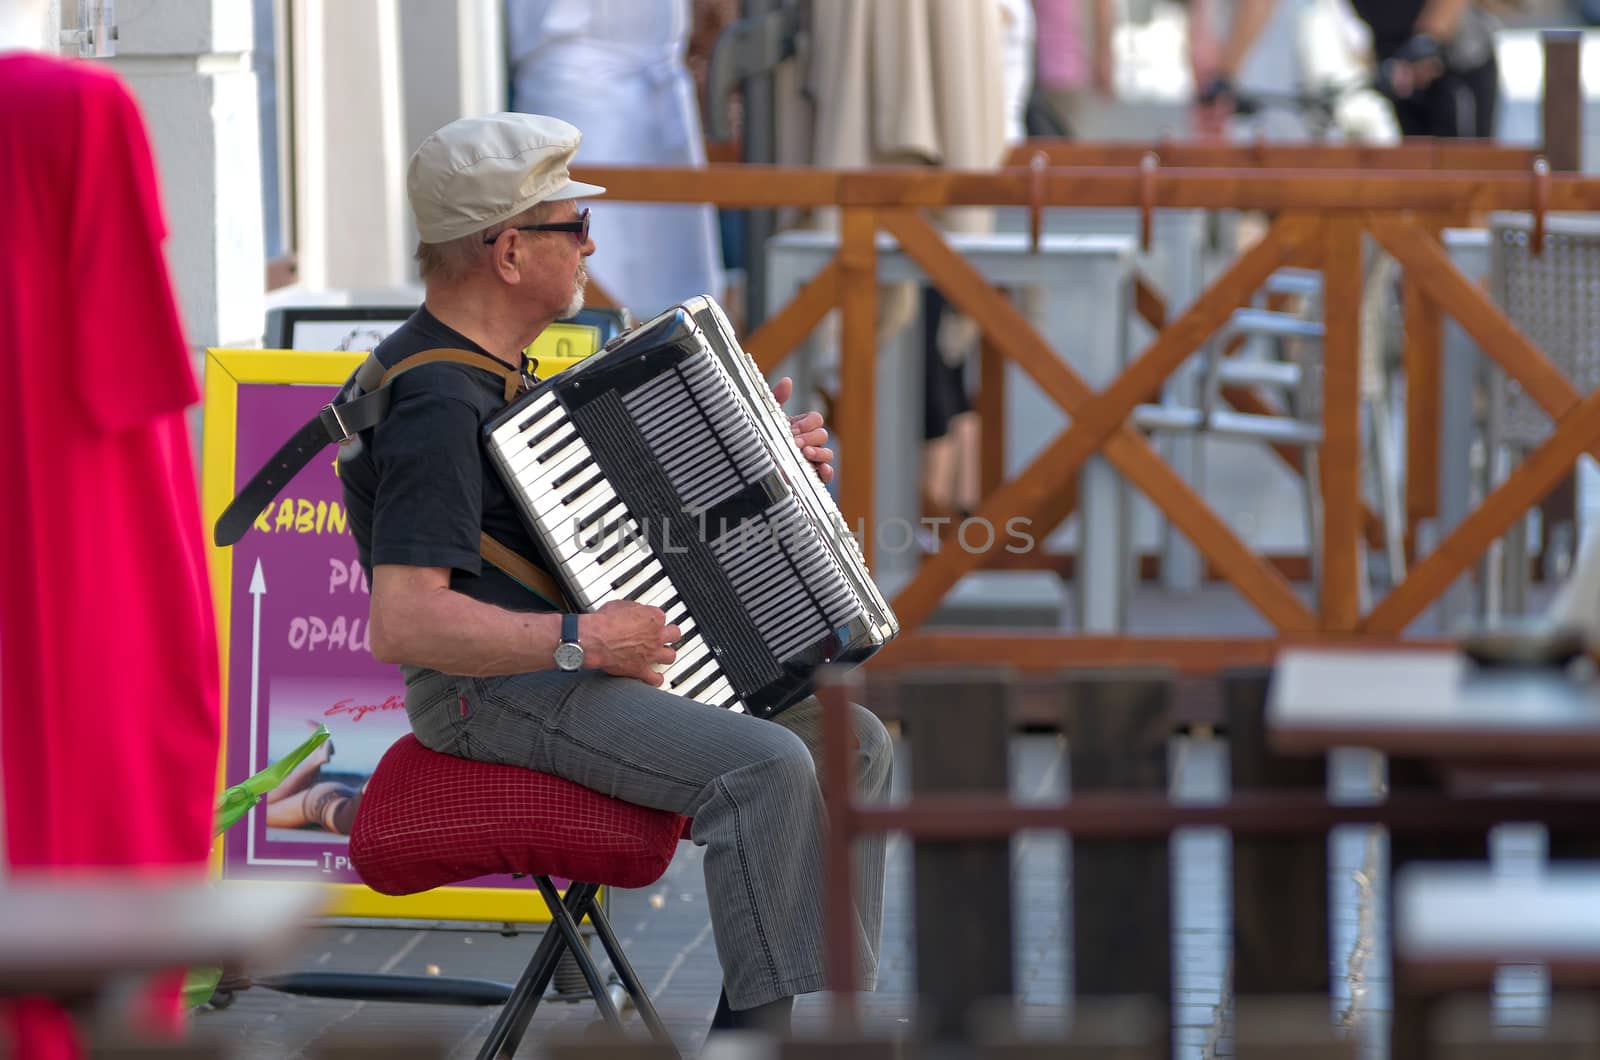 Warsaw, Poland - May 14, 2014: Unknown street musician playing the accordion in the street.